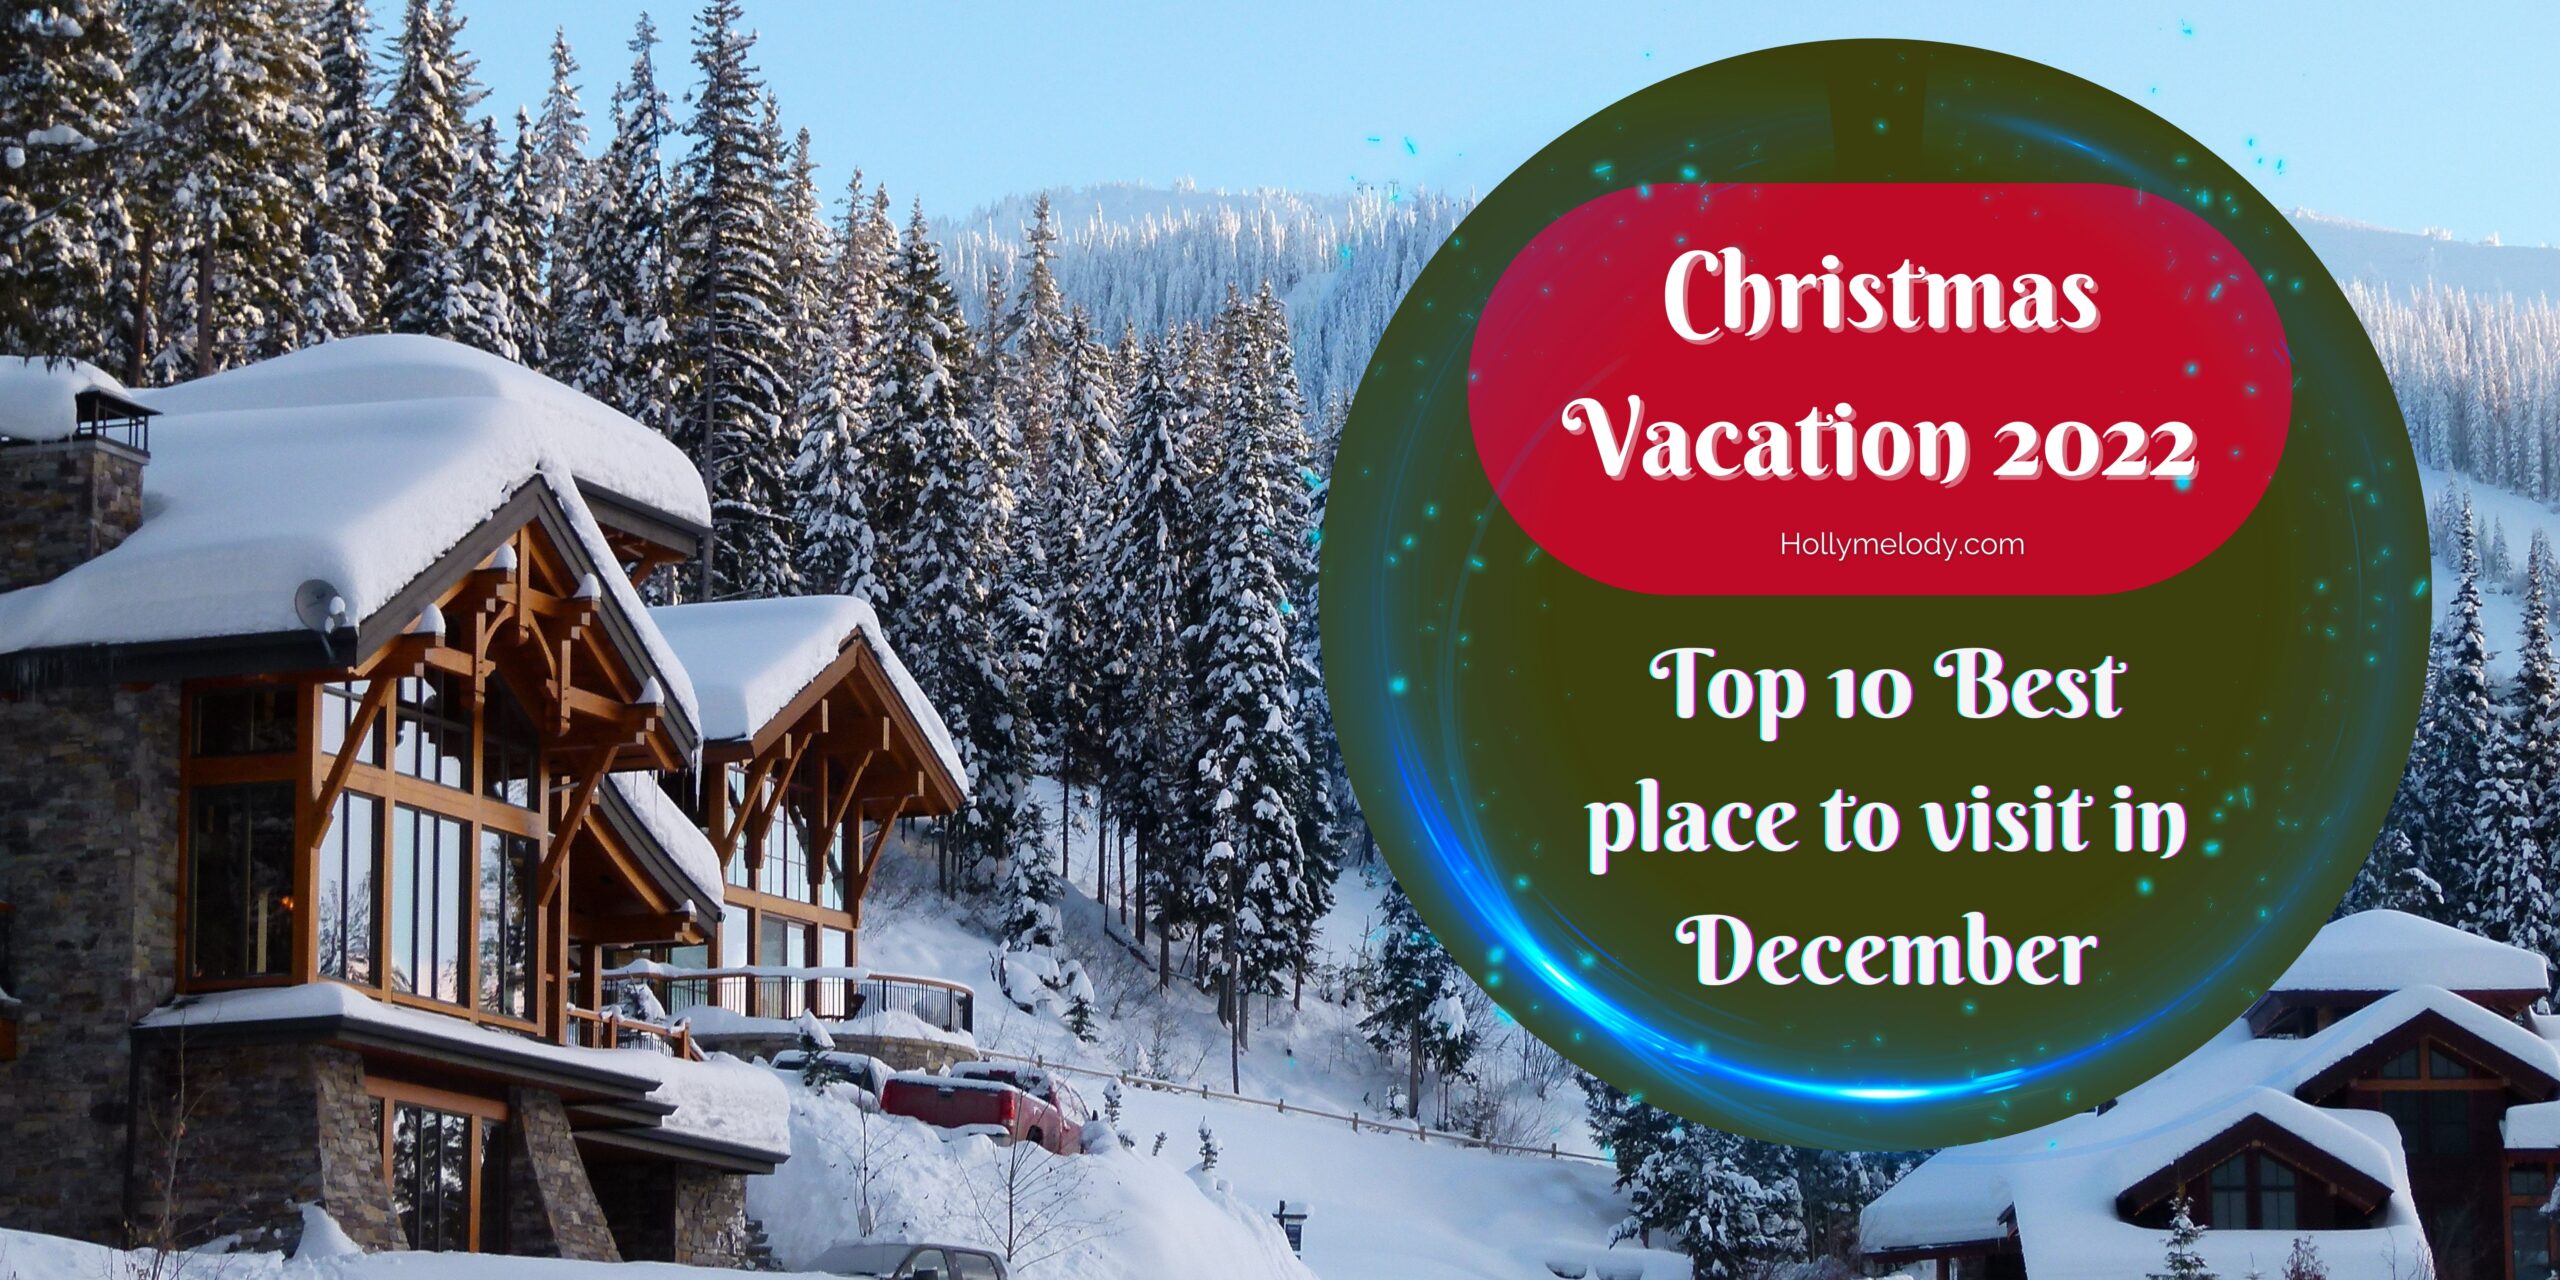 Find Cheap Christmas Family vacations Travel 2022: Top 10 Best place to visit in December